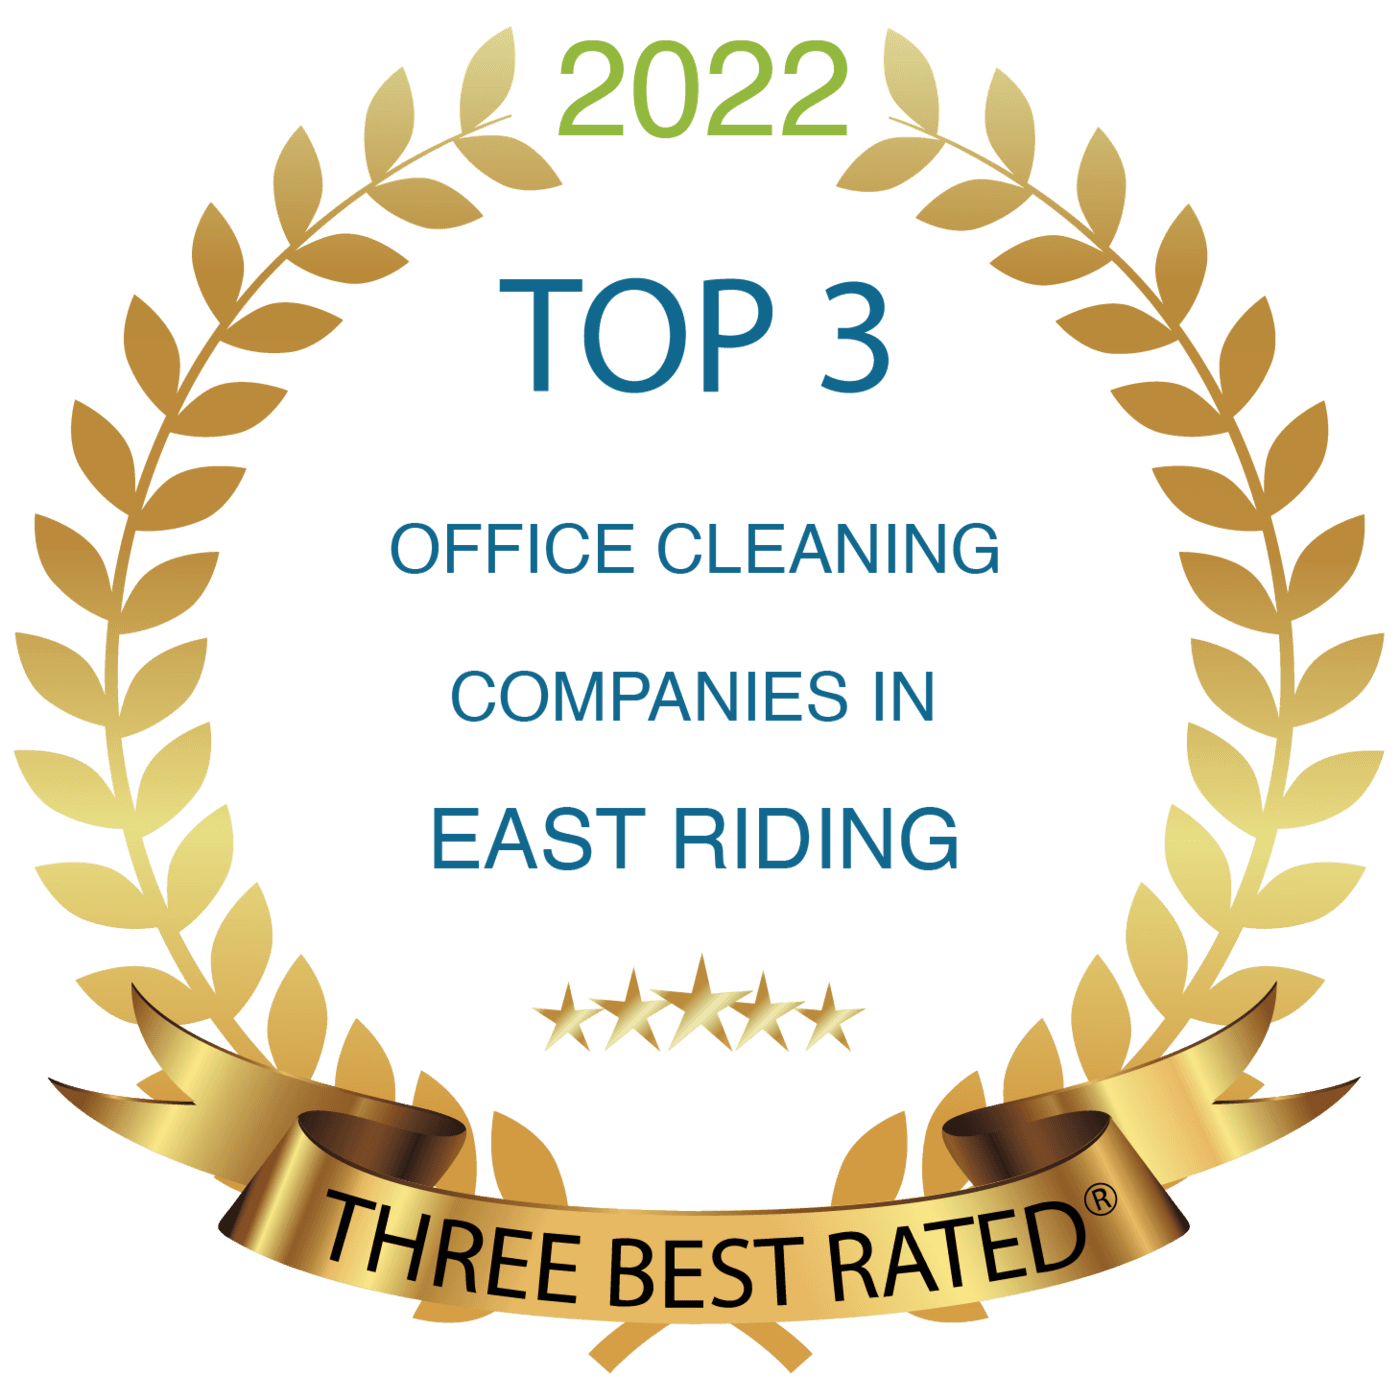 Office cleaning companies east riding 2022 clr 01